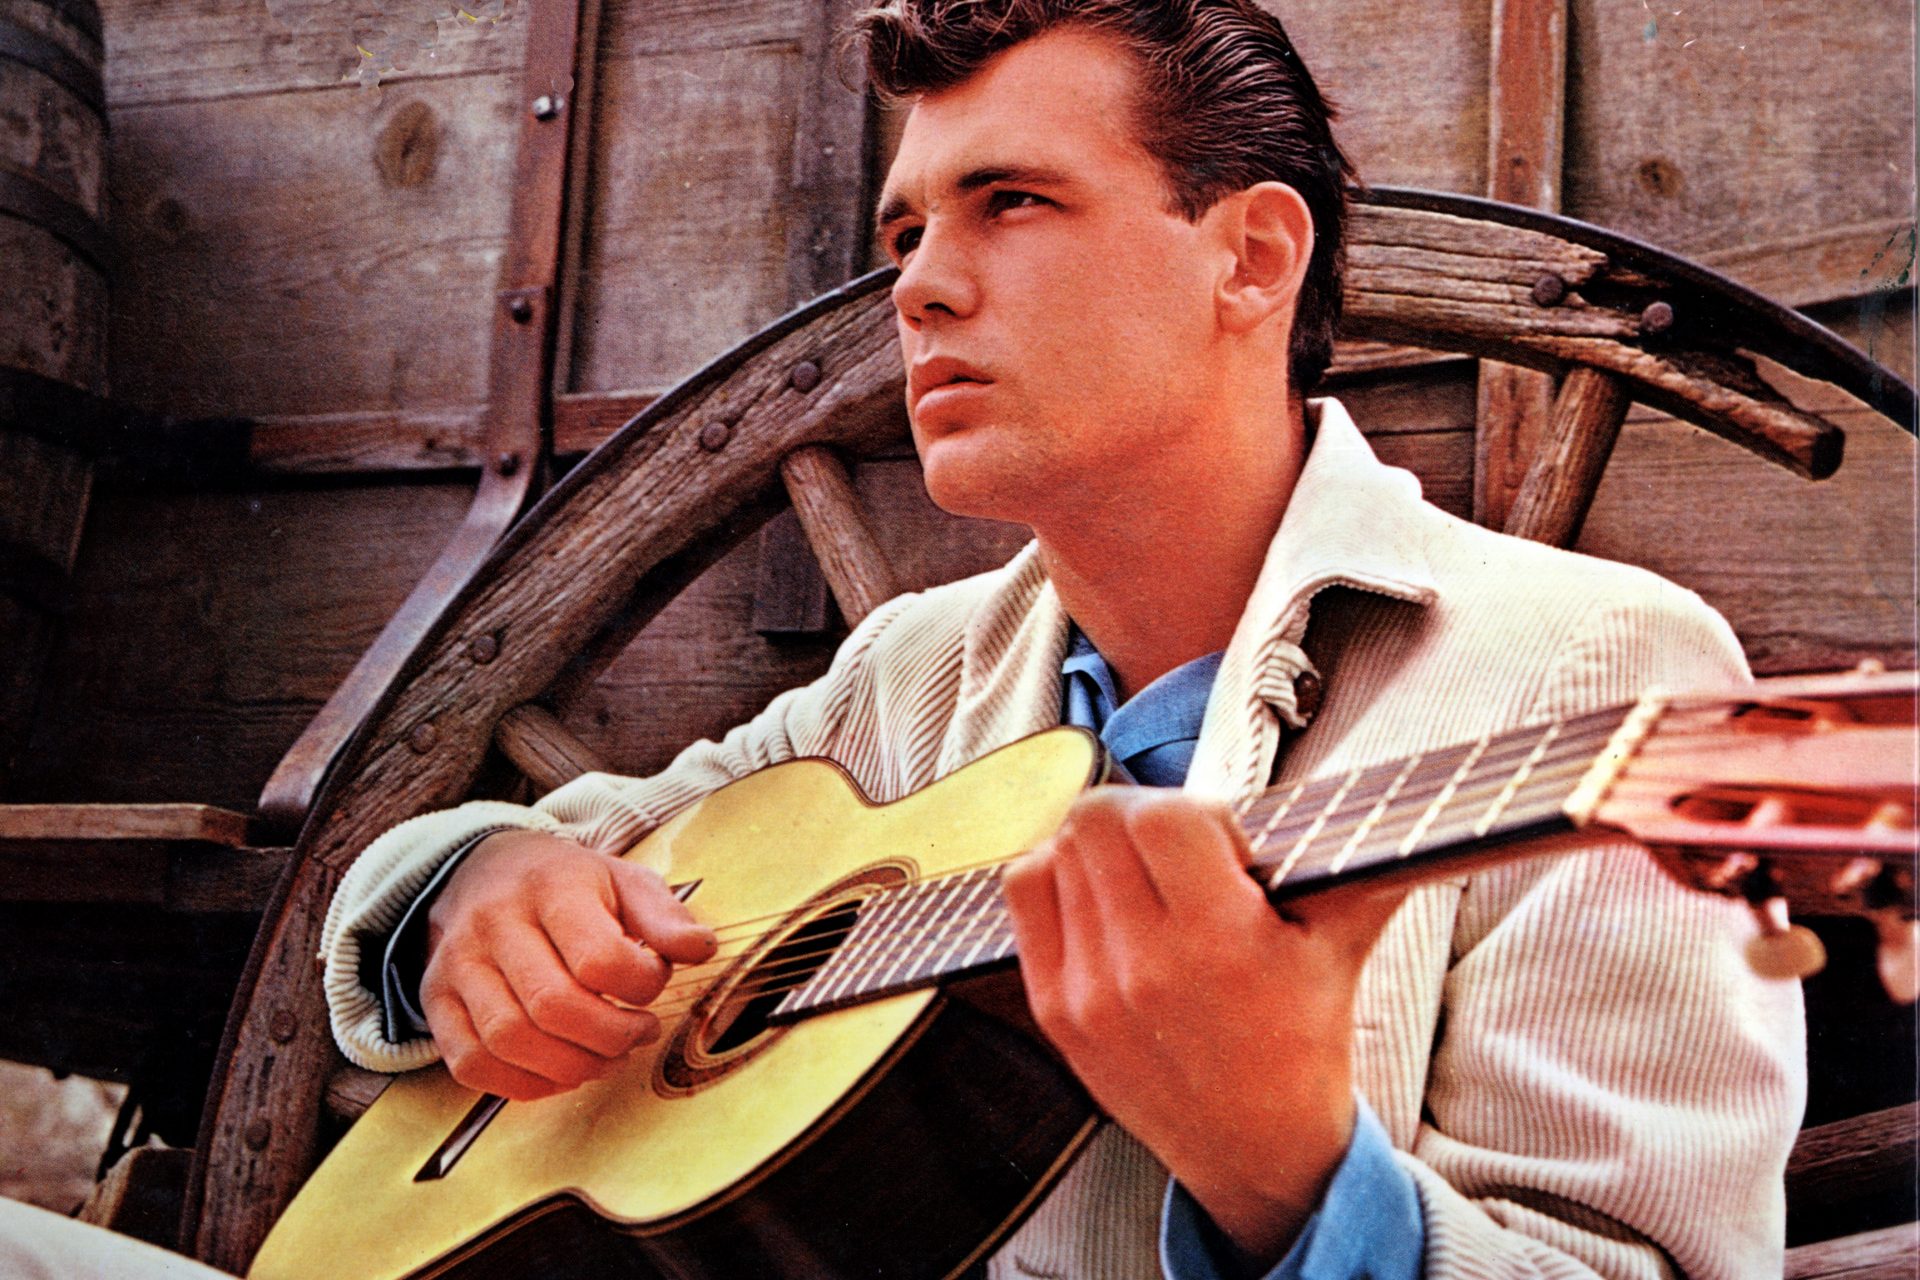 <p>He was also known as 'The King of Twang' due to the characteristic 'twangy' sound of his guitar. Duane Eddy played American rock and roll and became a famous guitarist in the late 1950s and early 60s, with hits like 'Rebel-'Rouser' and 'Peter Gunn'. Eddy passed away from cancer at the age of 86.</p>